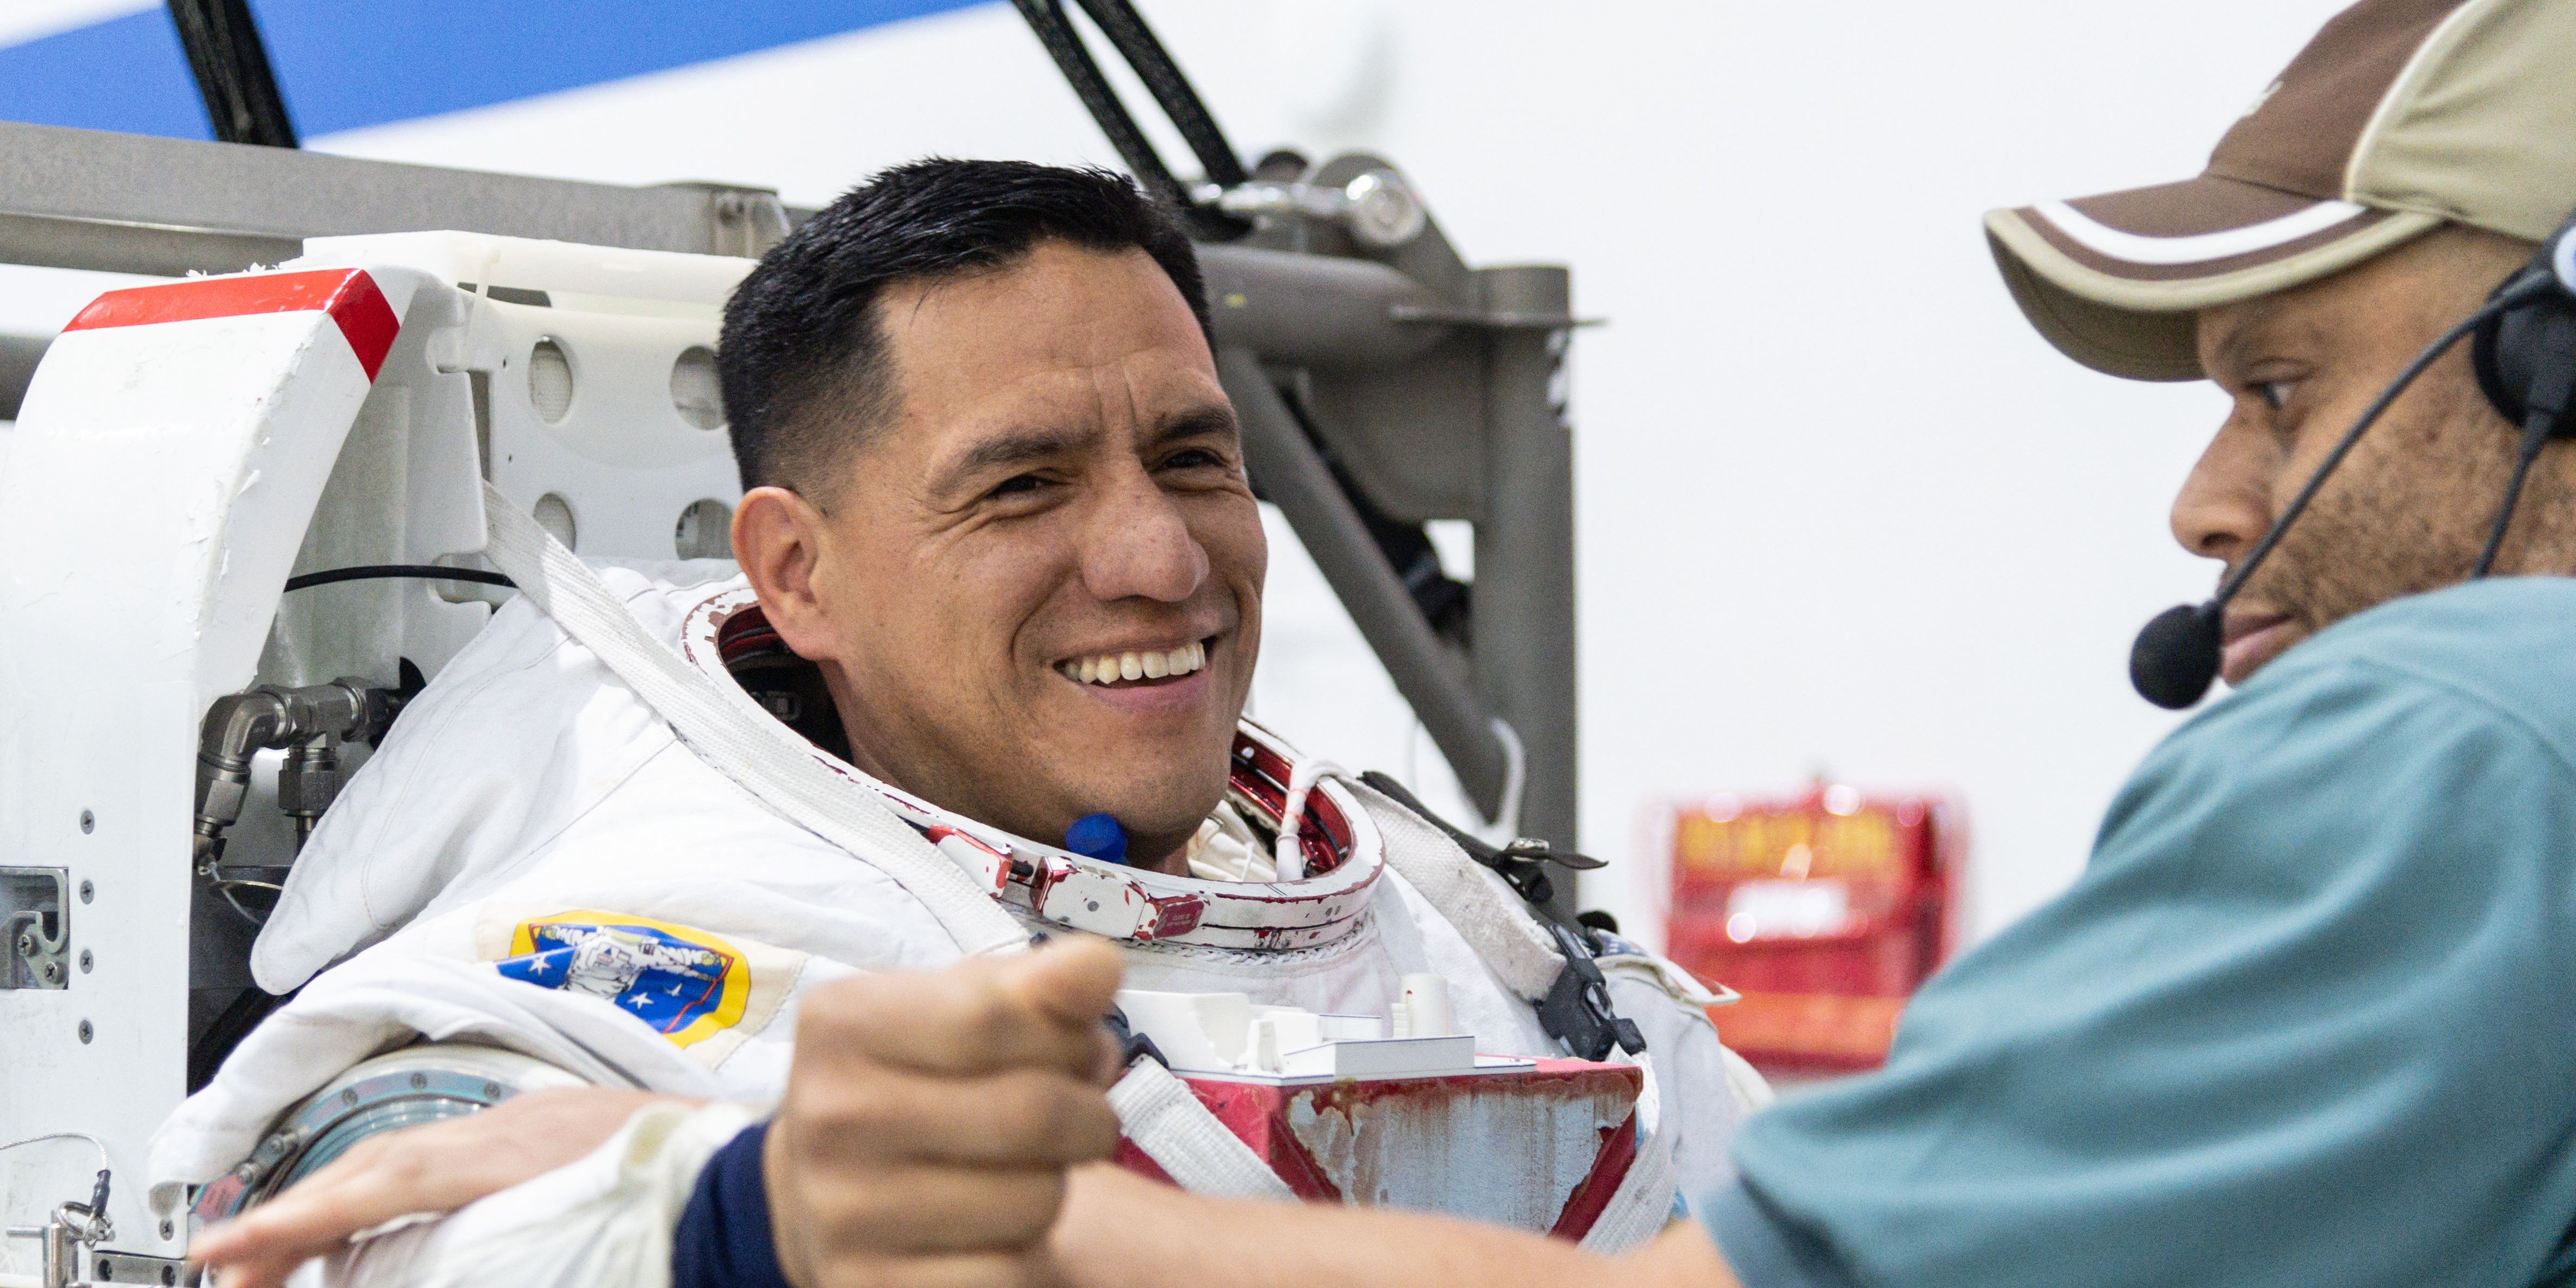 Frank Rubio gets help putting on a spacesuit at the Neutral Buoyancy Laboratory at NASA's Johnson Space Center in Houston to train for spacewalks